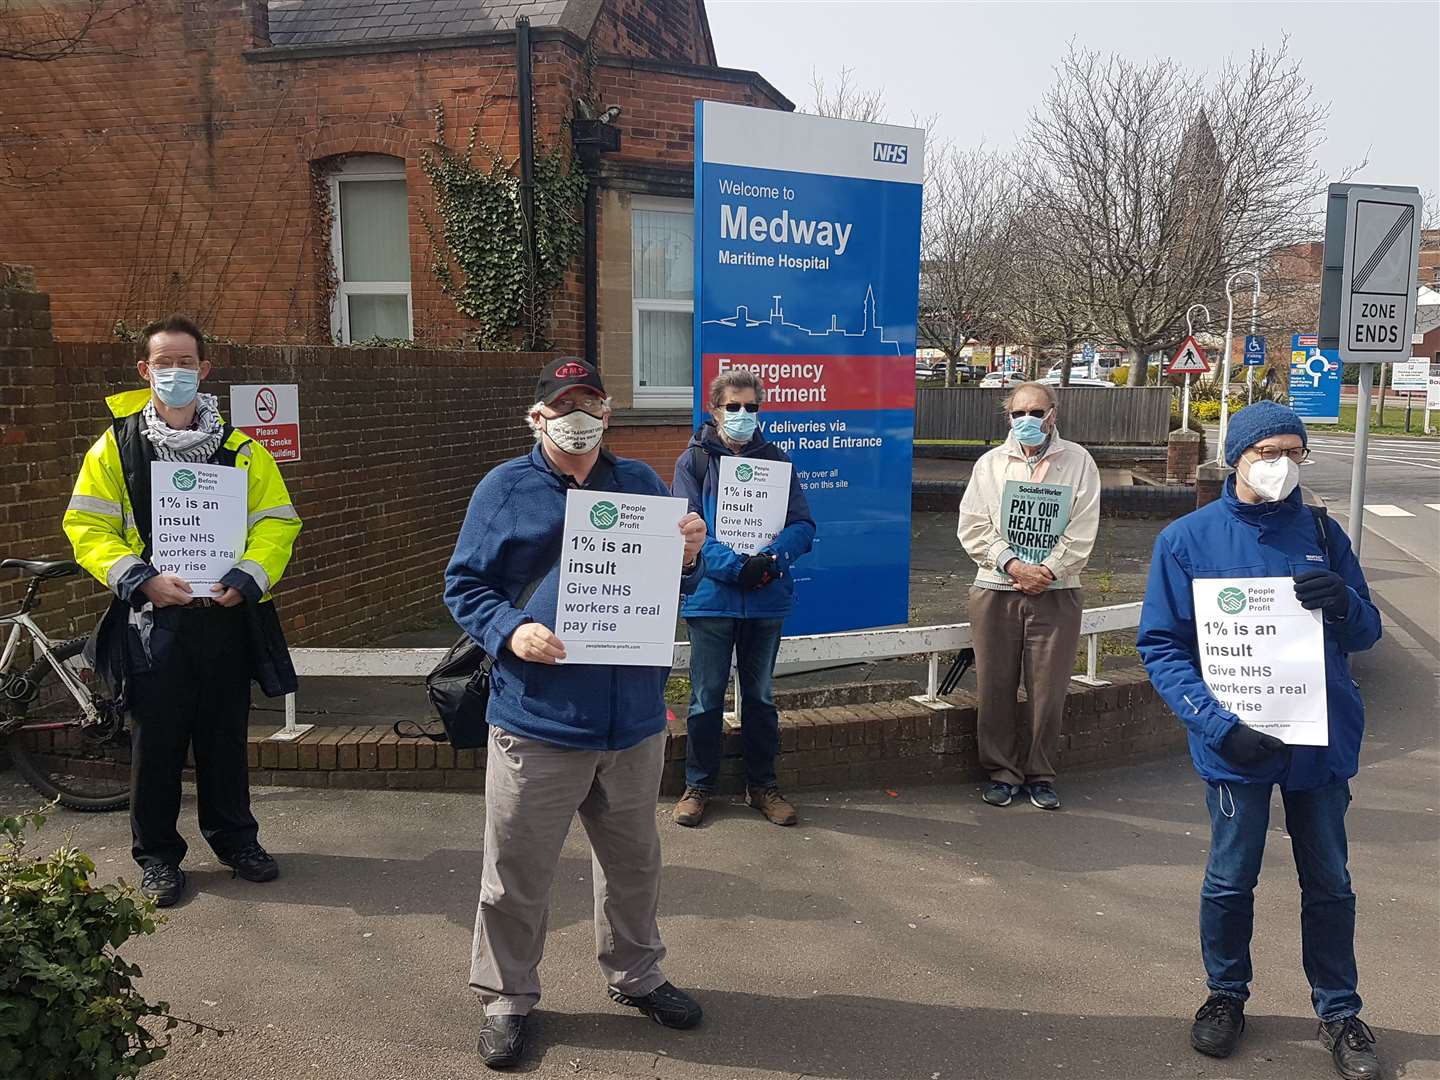 NHS workers protesting at Medway Maritime Hospital